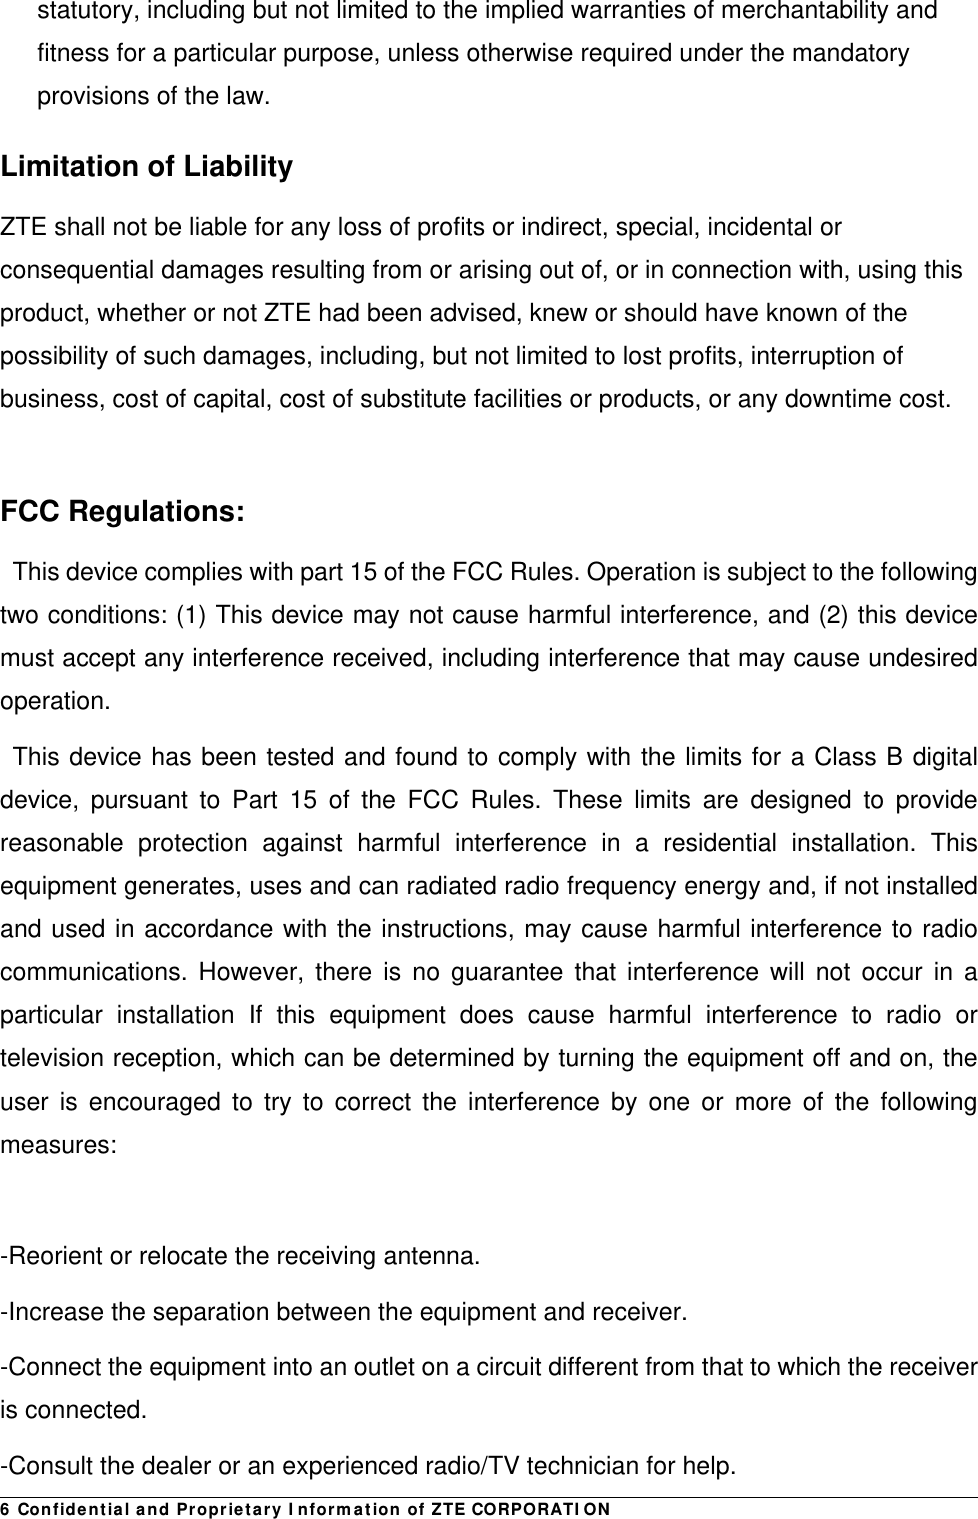 6 Confidential and Proprietary Information of ZTE CORPORATIONstatutory, including but not limited to the implied warranties of merchantability and fitness for a particular purpose, unless otherwise required under the mandatory provisions of the law. Limitation of Liability ZTE shall not be liable for any loss of profits or indirect, special, incidental or consequential damages resulting from or arising out of, or in connection with, using this product, whether or not ZTE had been advised, knew or should have known of the possibility of such damages, including, but not limited to lost profits, interruption of business, cost of capital, cost of substitute facilities or products, or any downtime cost.   FCC Regulations: This device complies with part 15 of the FCC Rules. Operation is subject to the following two conditions: (1) This device may not cause harmful interference, and (2) this device must accept any interference received, including interference that may cause undesired operation. This device has been tested and found to comply with the limits for a Class B digital device, pursuant to Part 15 of the FCC Rules. These limits are designed to provide reasonable protection against harmful interference in a residential installation. This equipment generates, uses and can radiated radio frequency energy and, if not installed and used in accordance with the instructions, may cause harmful interference to radio communications. However, there is no guarantee that interference will not occur in a particular installation If this equipment does cause harmful interference to radio or television reception, which can be determined by turning the equipment off and on, the user is encouraged to try to correct the interference by one or more of the following measures:  -Reorient or relocate the receiving antenna. -Increase the separation between the equipment and receiver. -Connect the equipment into an outlet on a circuit different from that to which the receiver is connected. -Consult the dealer or an experienced radio/TV technician for help. 